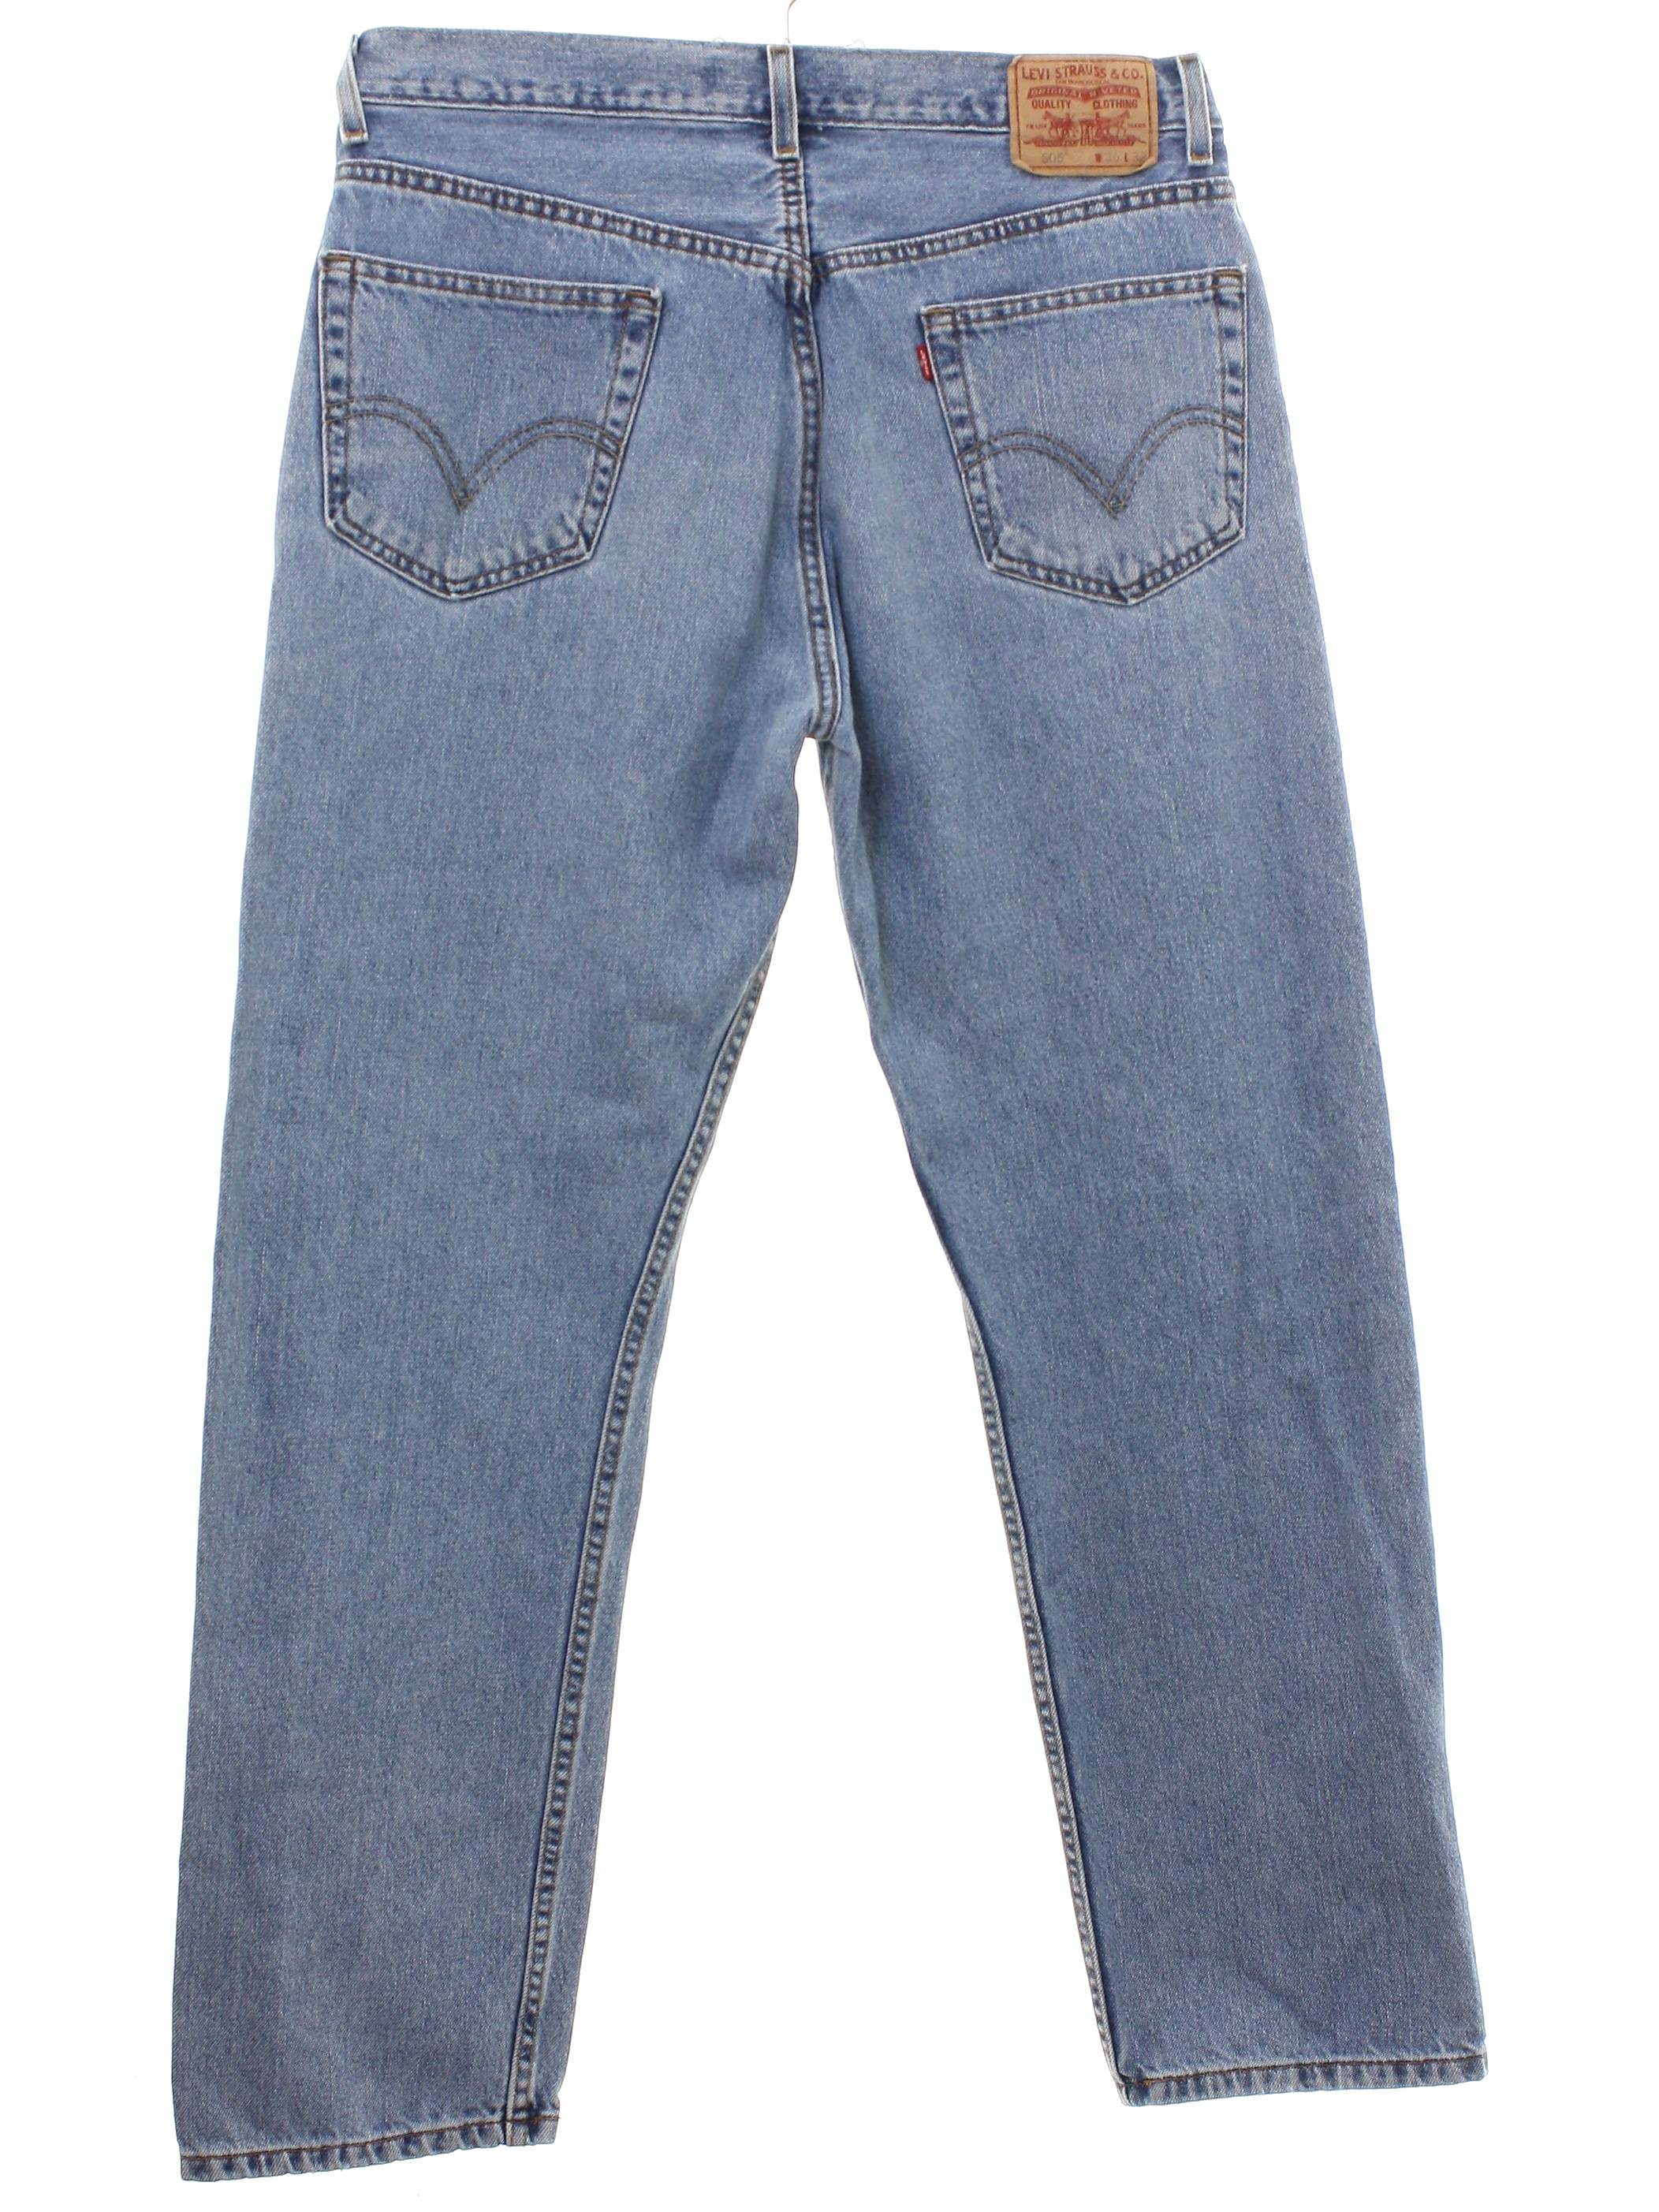 1990s Levis 505 Pants: 90s or newer -Levis 505- Mens faded and worn ...